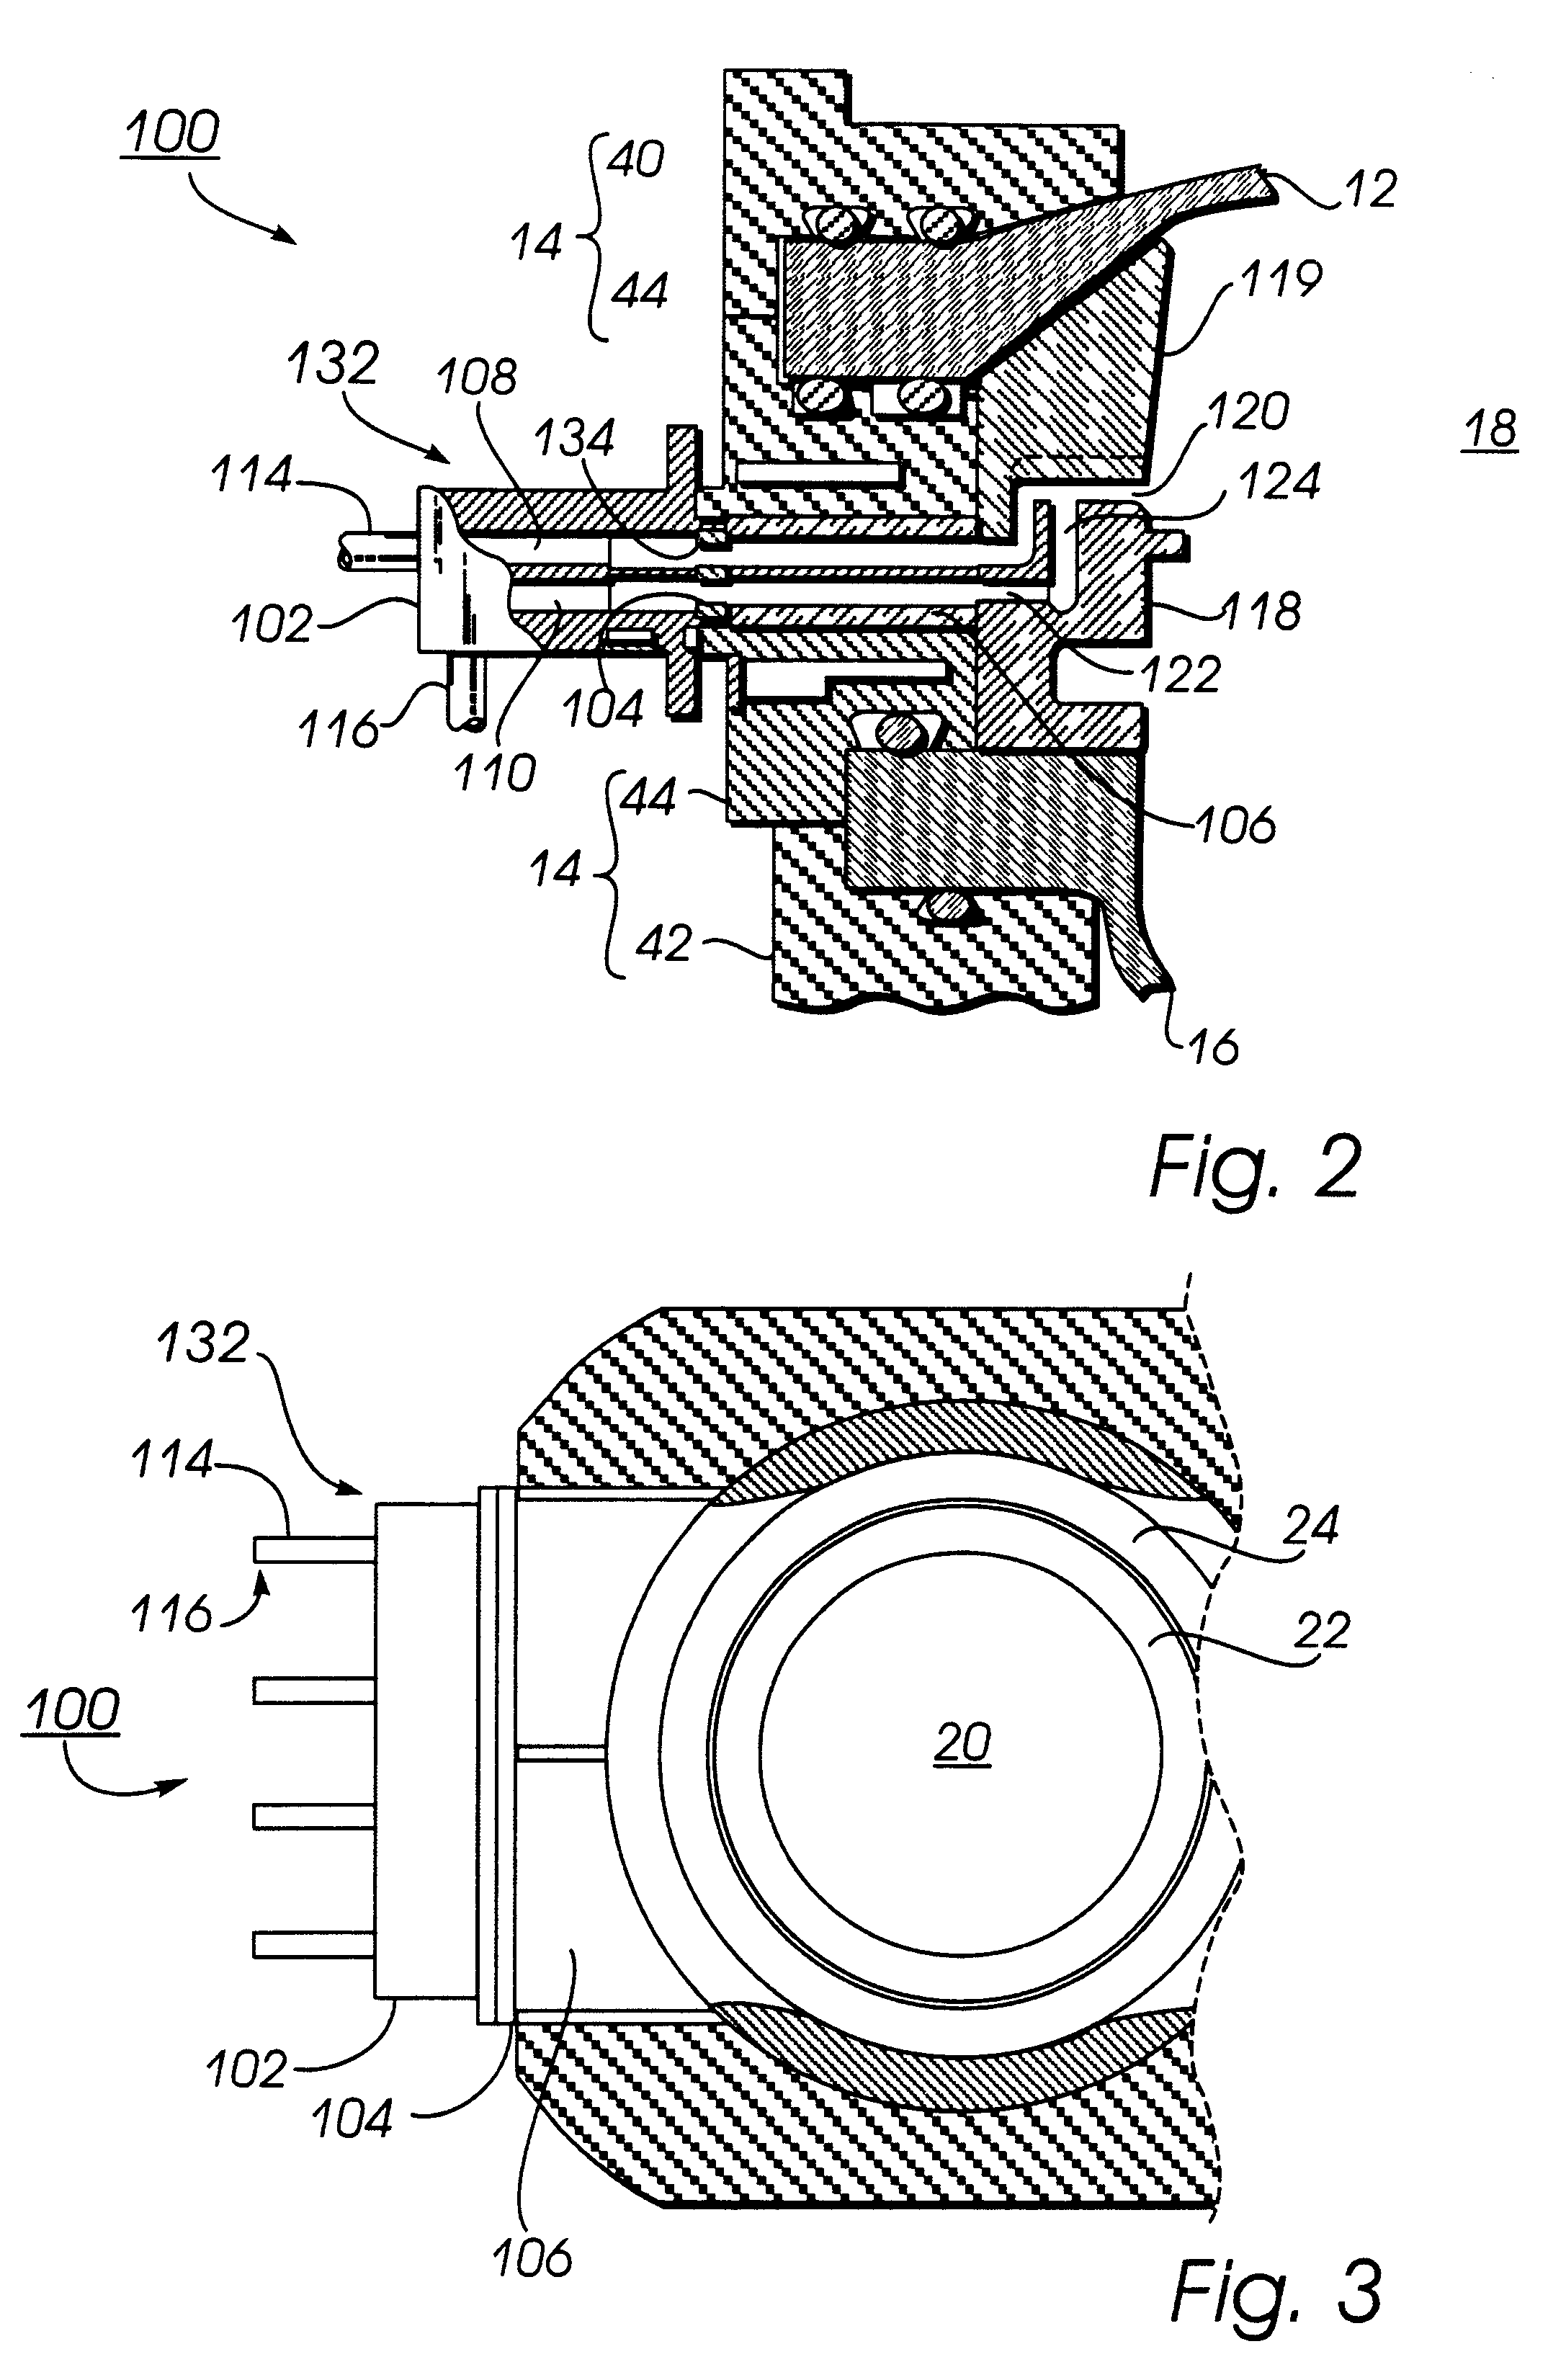 Gas inlets for wafer processing chamber